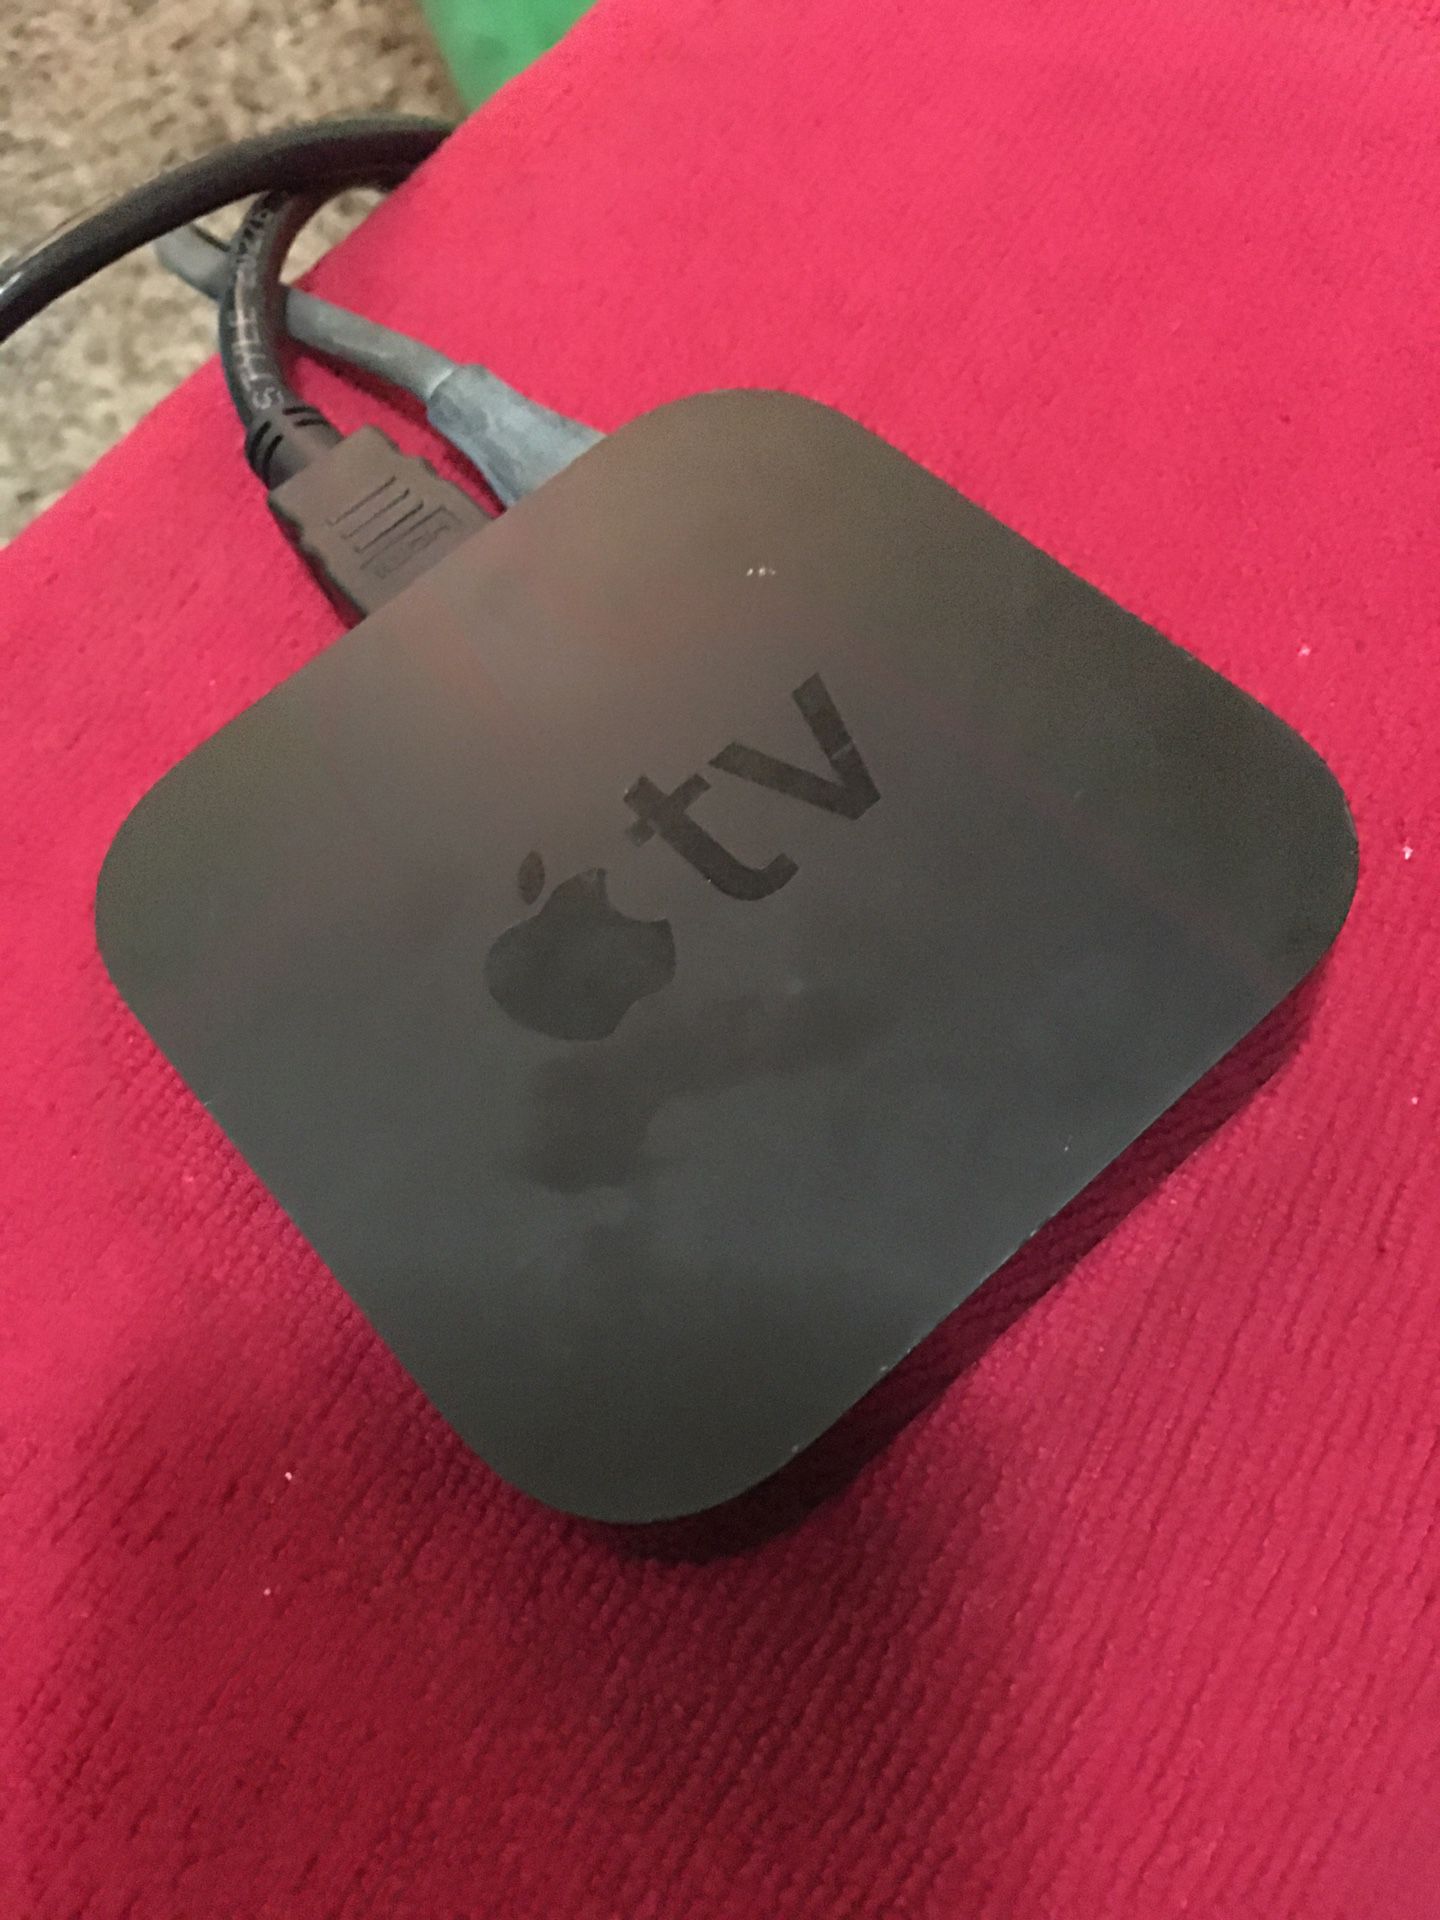 Apple TV with control